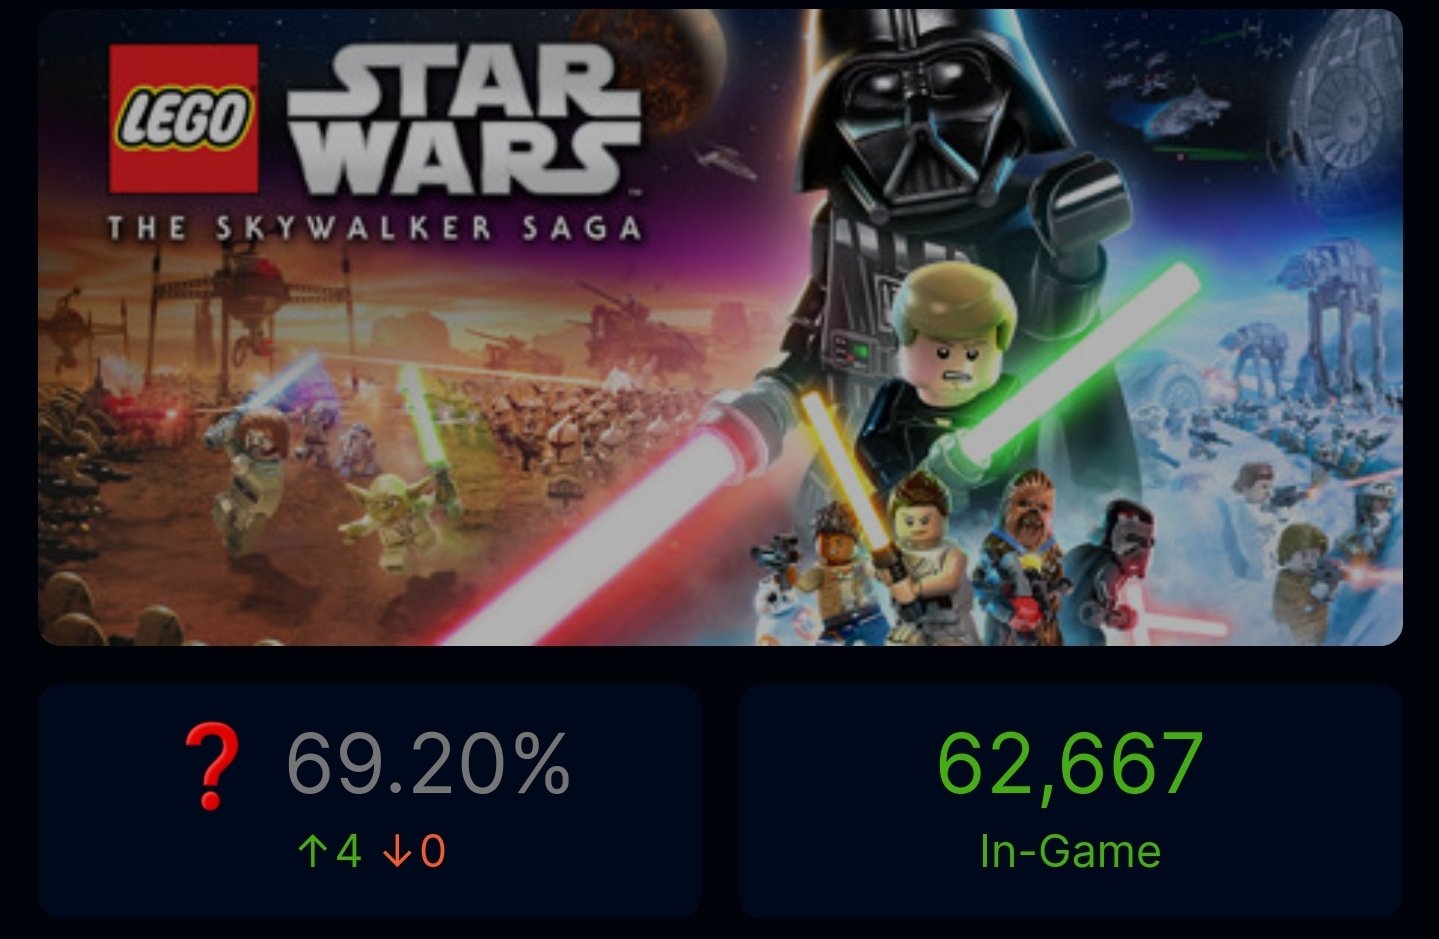 Benji-Sales on Twitter: "Lego Star Wars: The Skywalker Saga has CRUSHED the all-time concurrent players record for the Lego on Steam LEGO Top 5 All-Time Players Peak • Skywalker Saga -